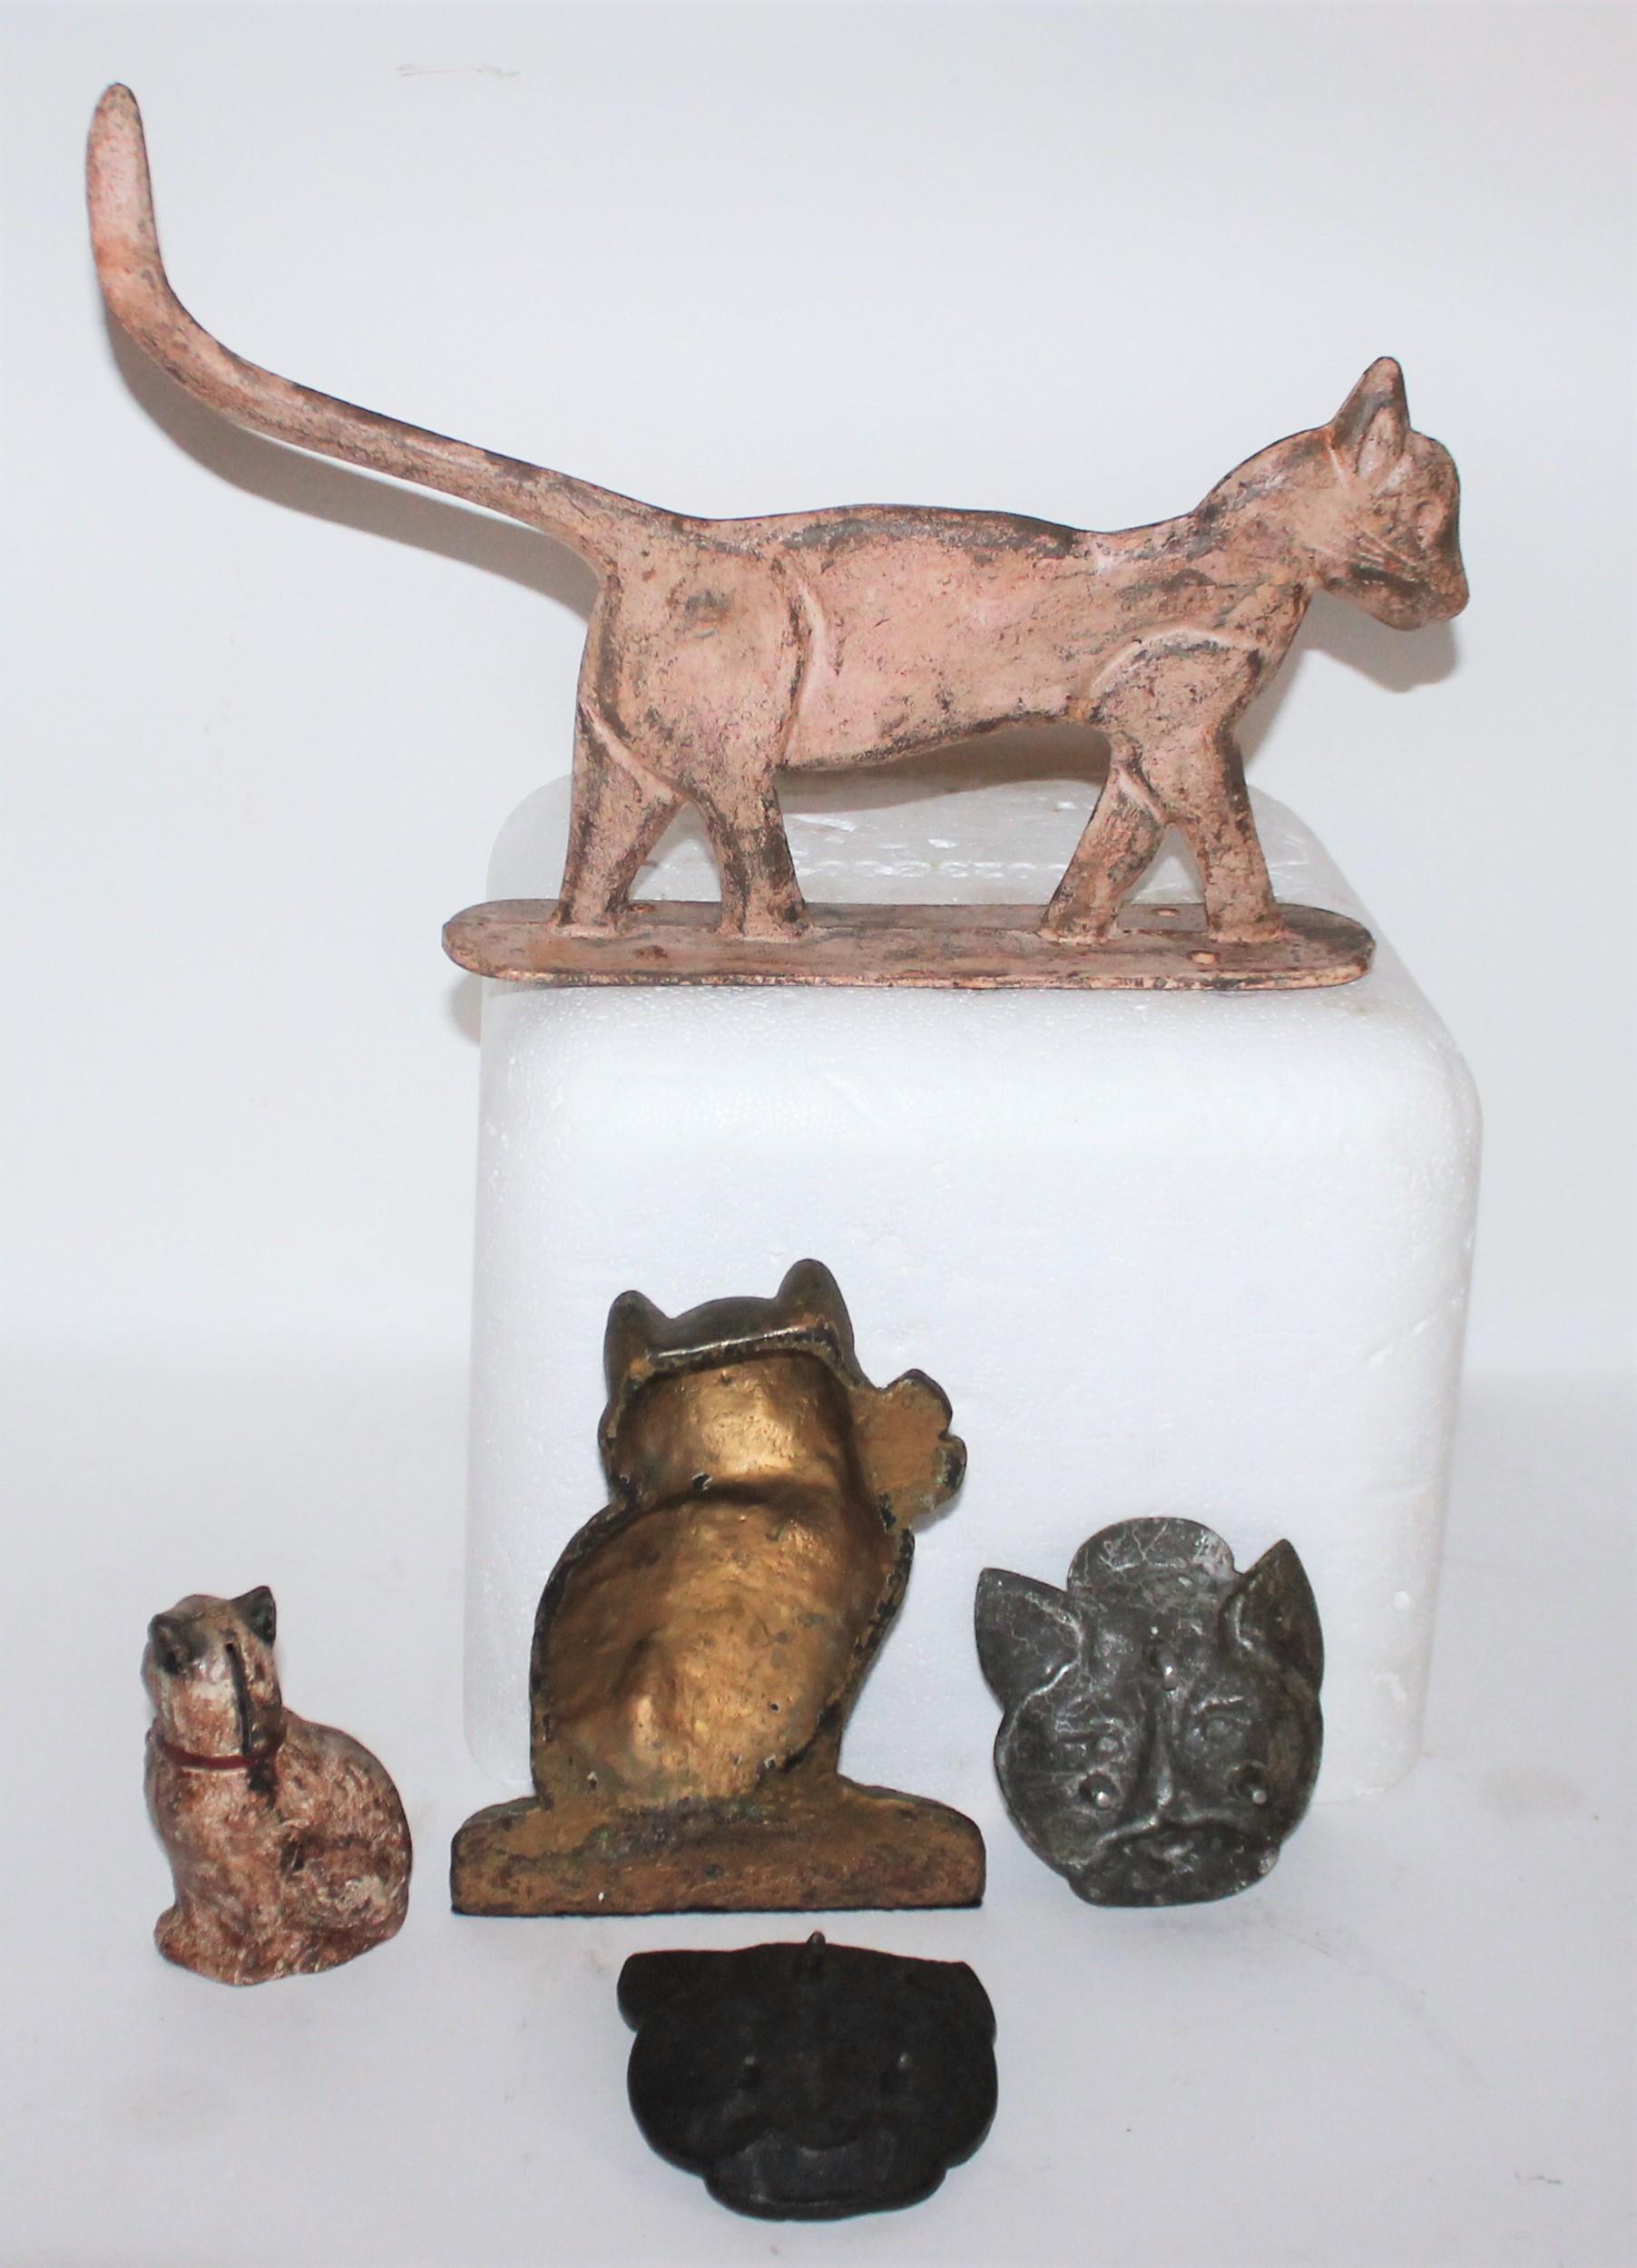 Collections of six cast iron cat items from the early 19th century.

Collection of three 19th century cast iron cats trays. These cats look like they were a give away from some iron works company. Perhaps a pot belly stove or old iron forger. They